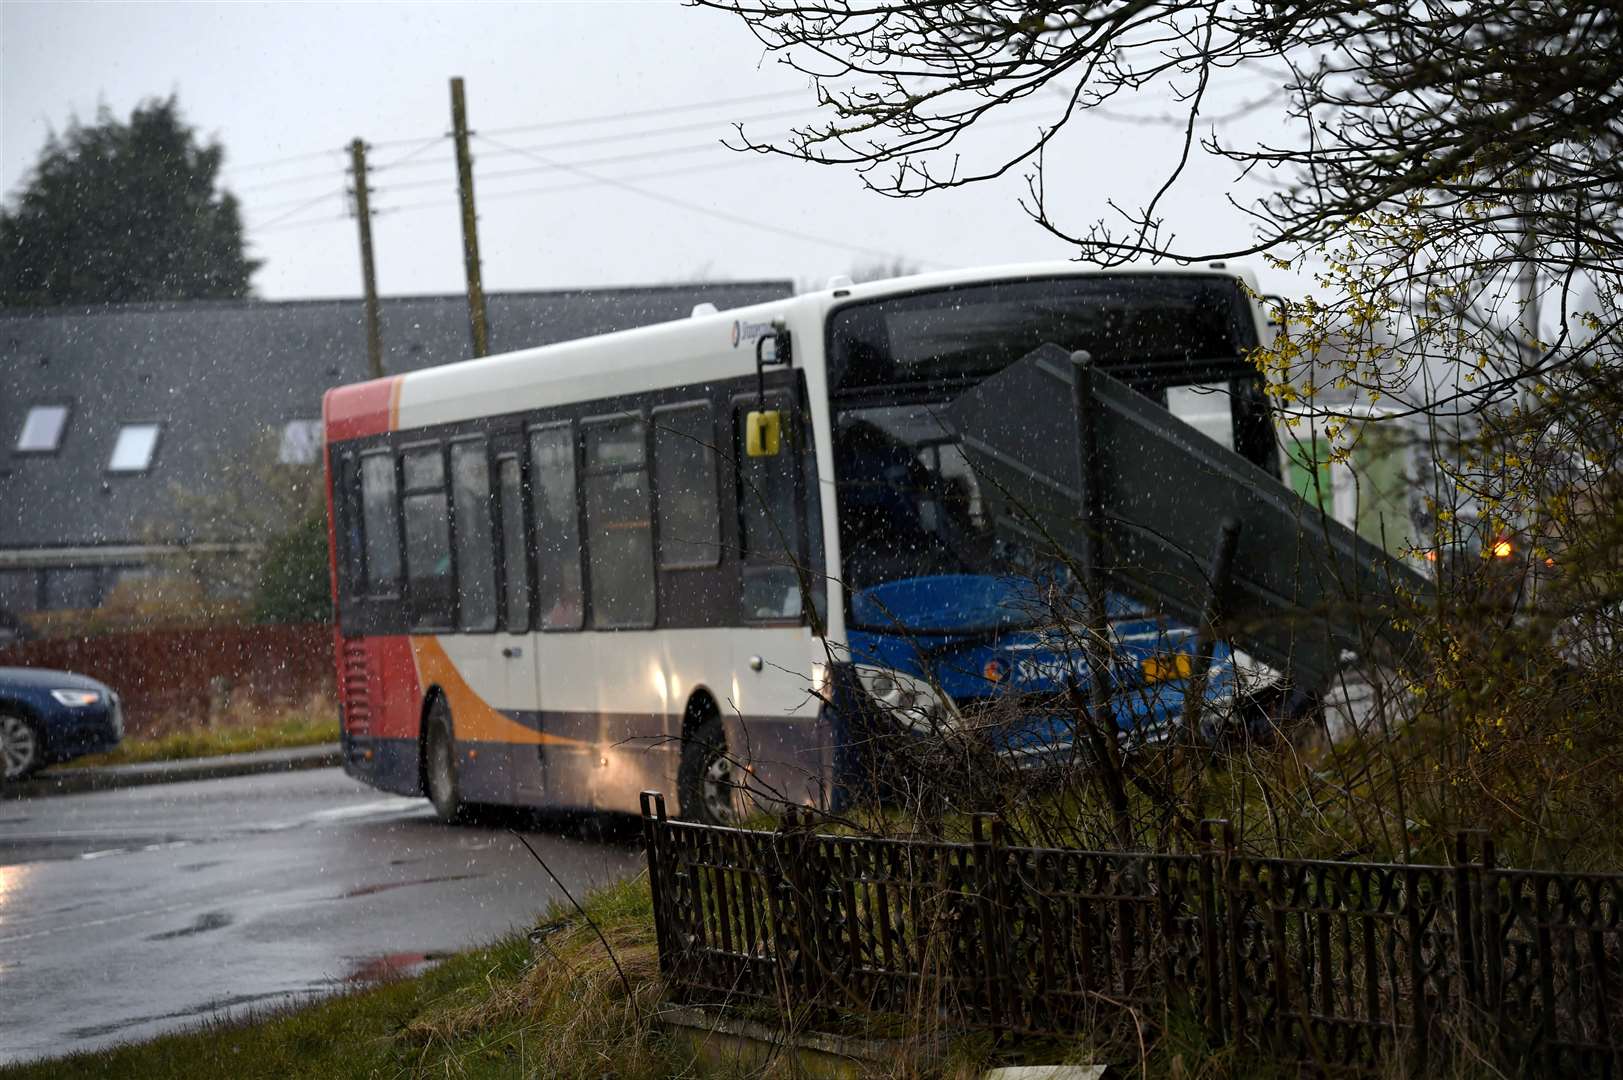 Bus and Asda delivery van collided at the junction on B9161 and the A832.